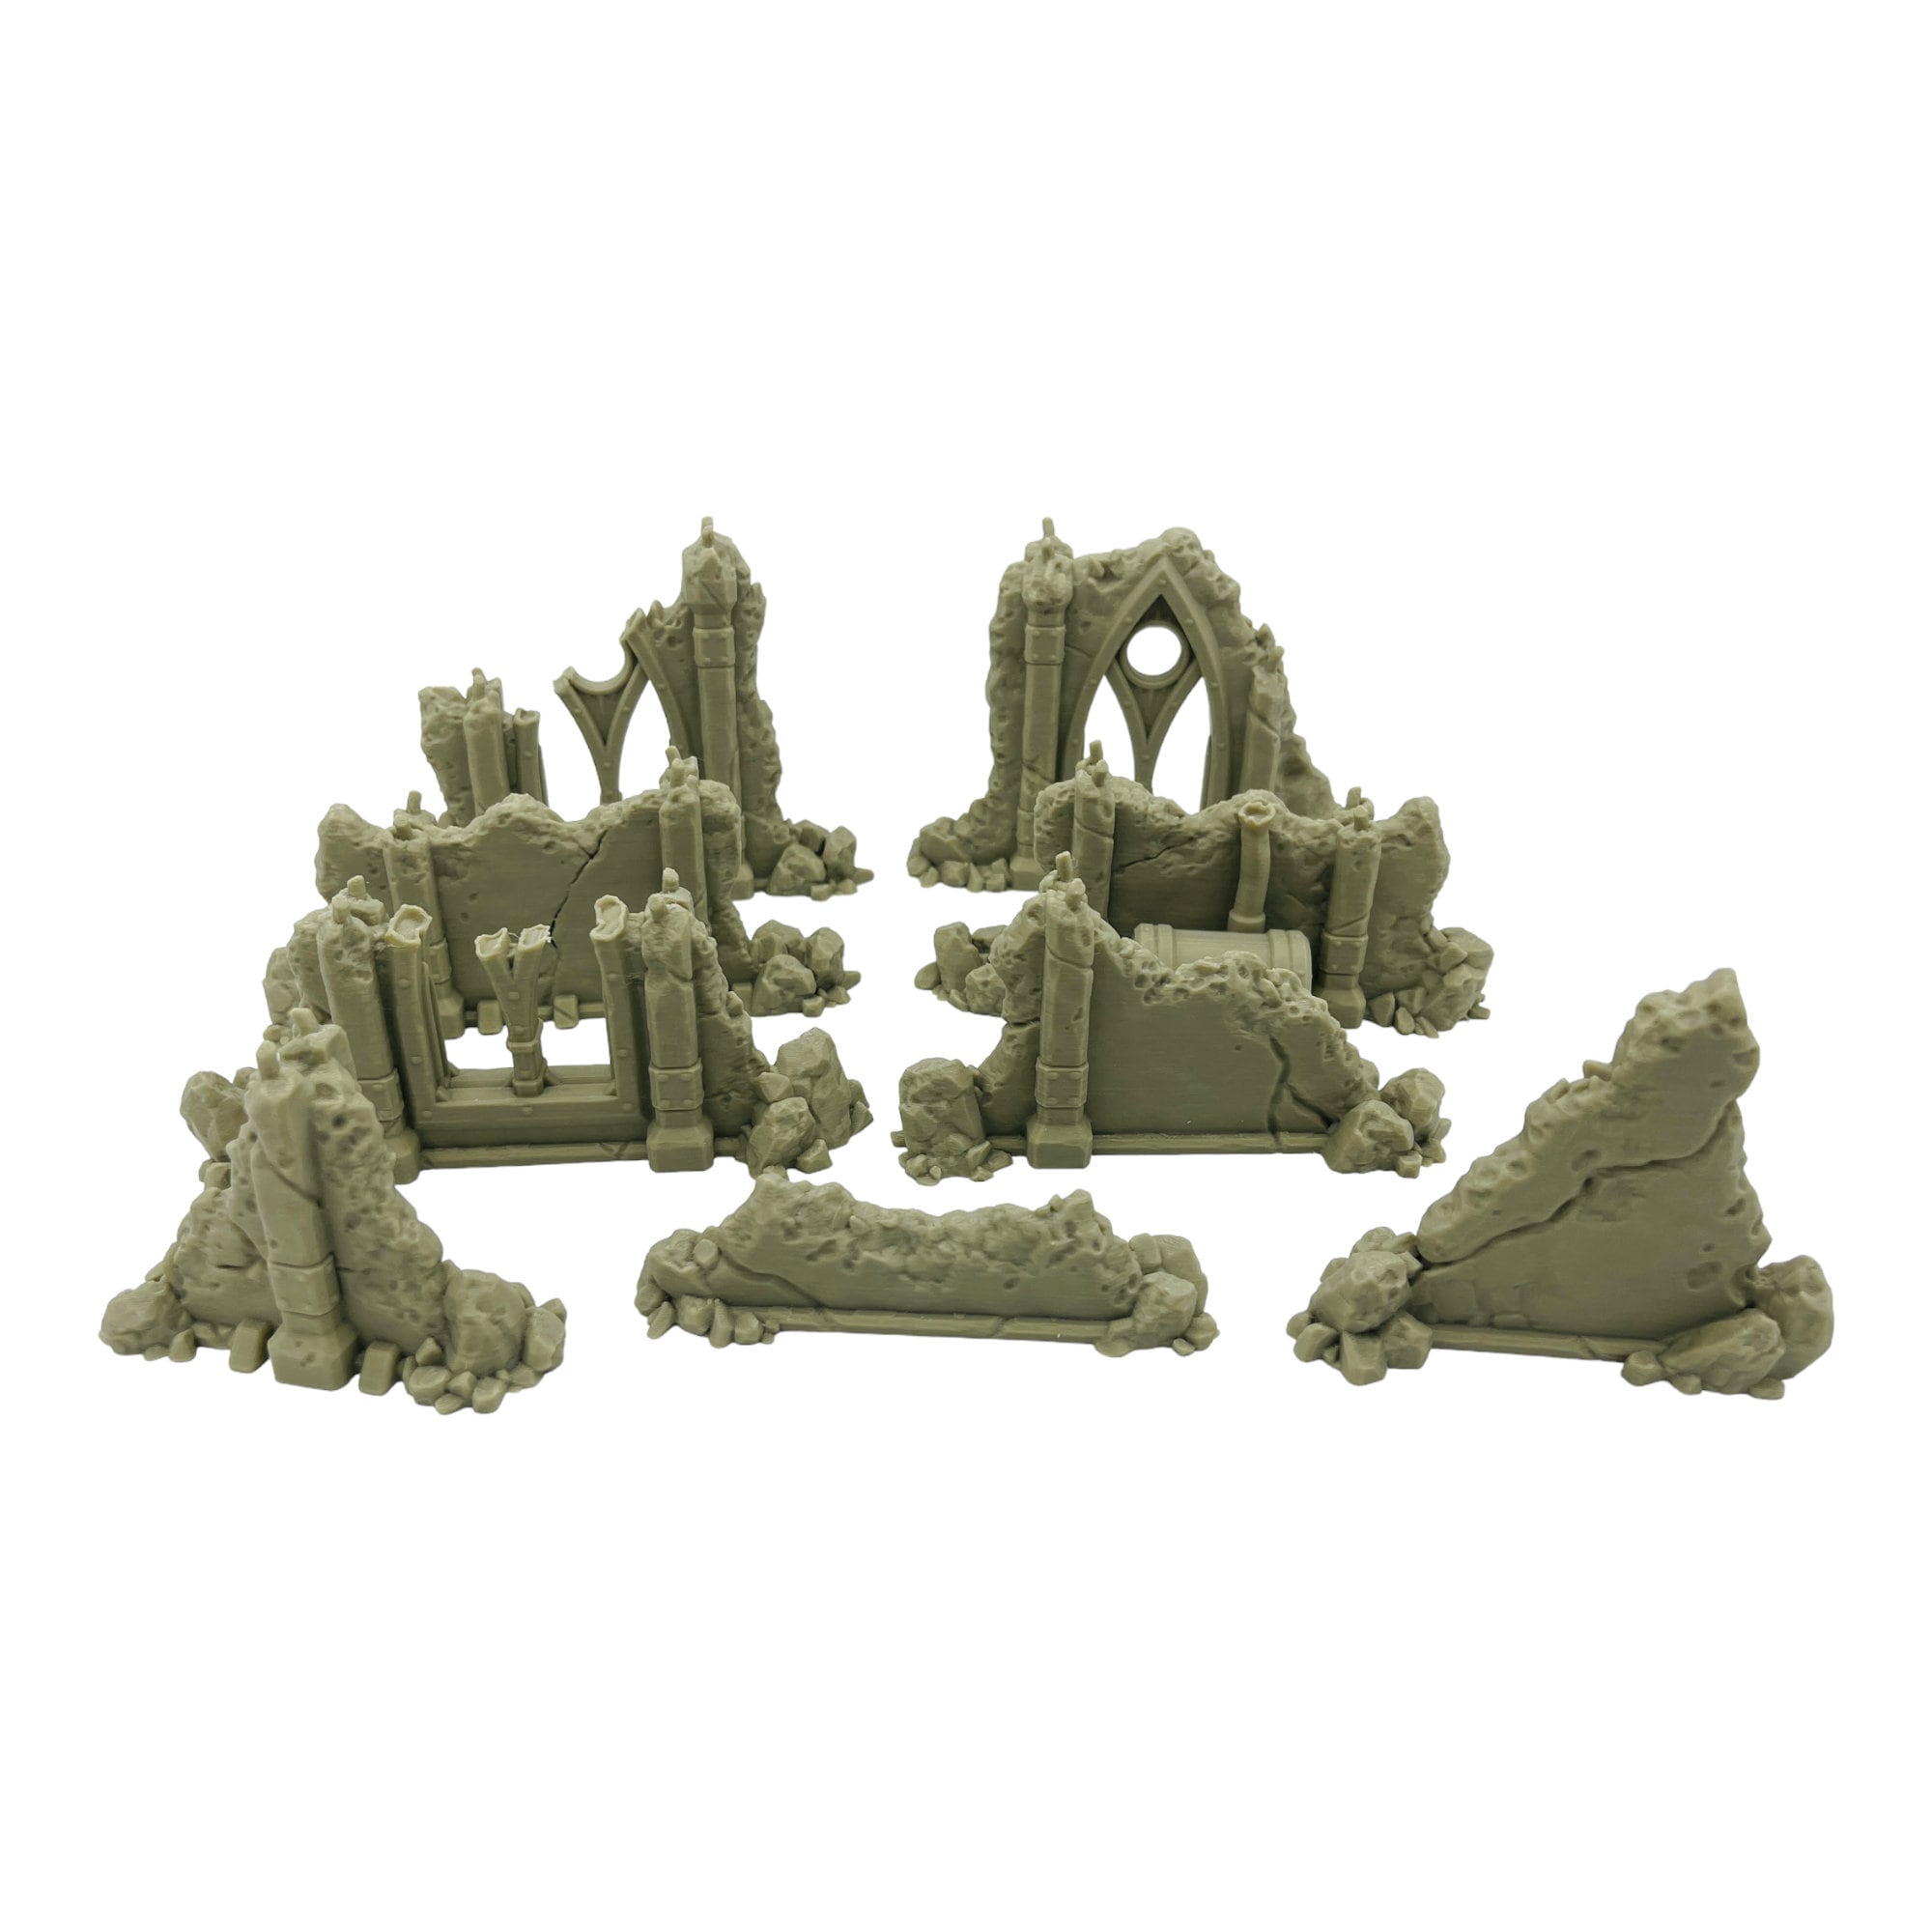 Ruined Ground Scatter Strait Pieces - Ruins of the Empire / Forbidden Prints / RPG and Wargame 3d Printed Terrain / Licensed Printer